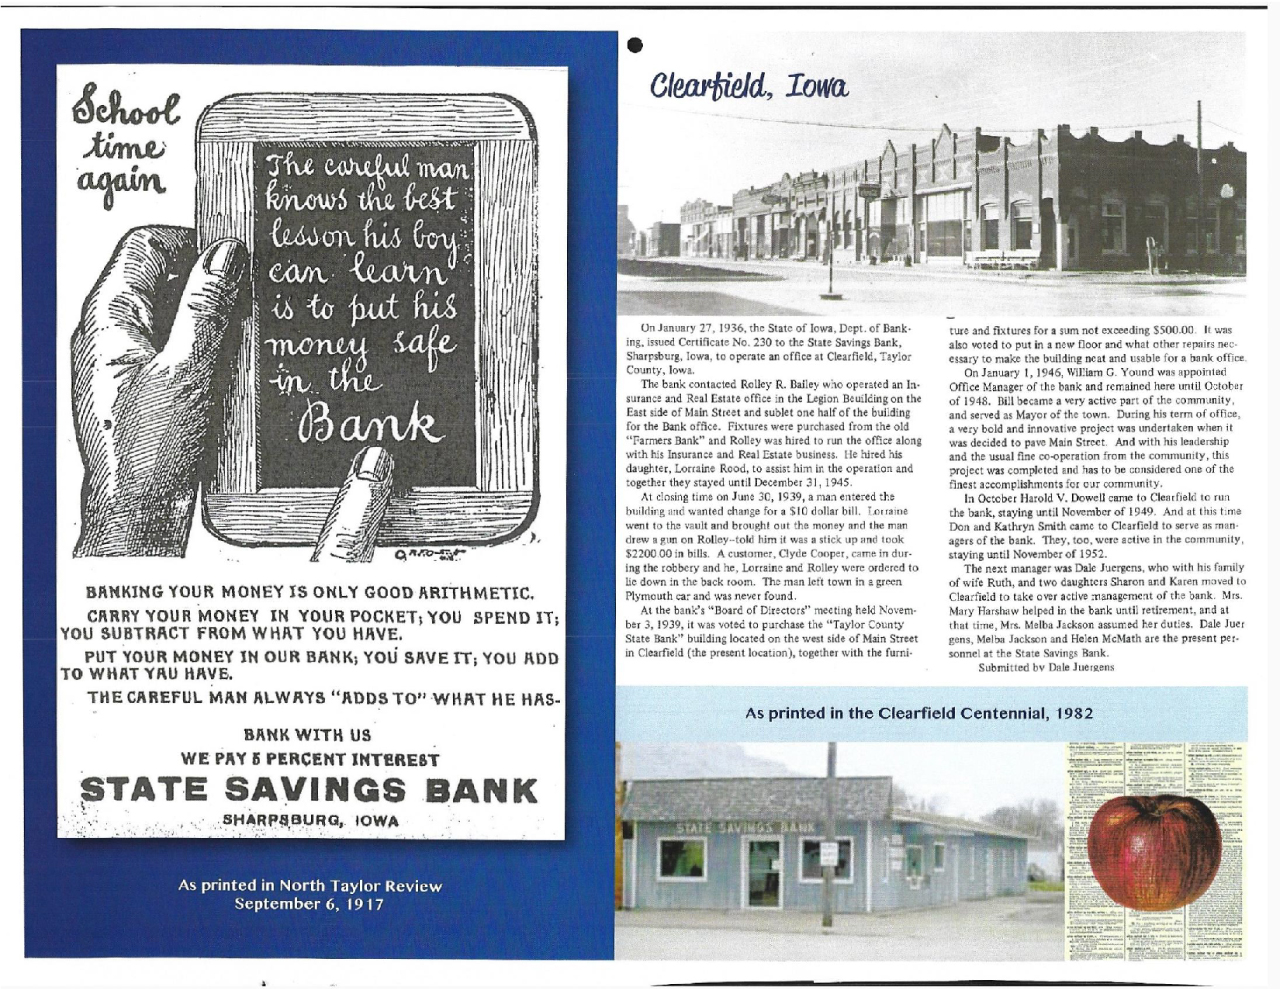 newspaper clippings mentioning State Savings Bank dating 1917 and 1982